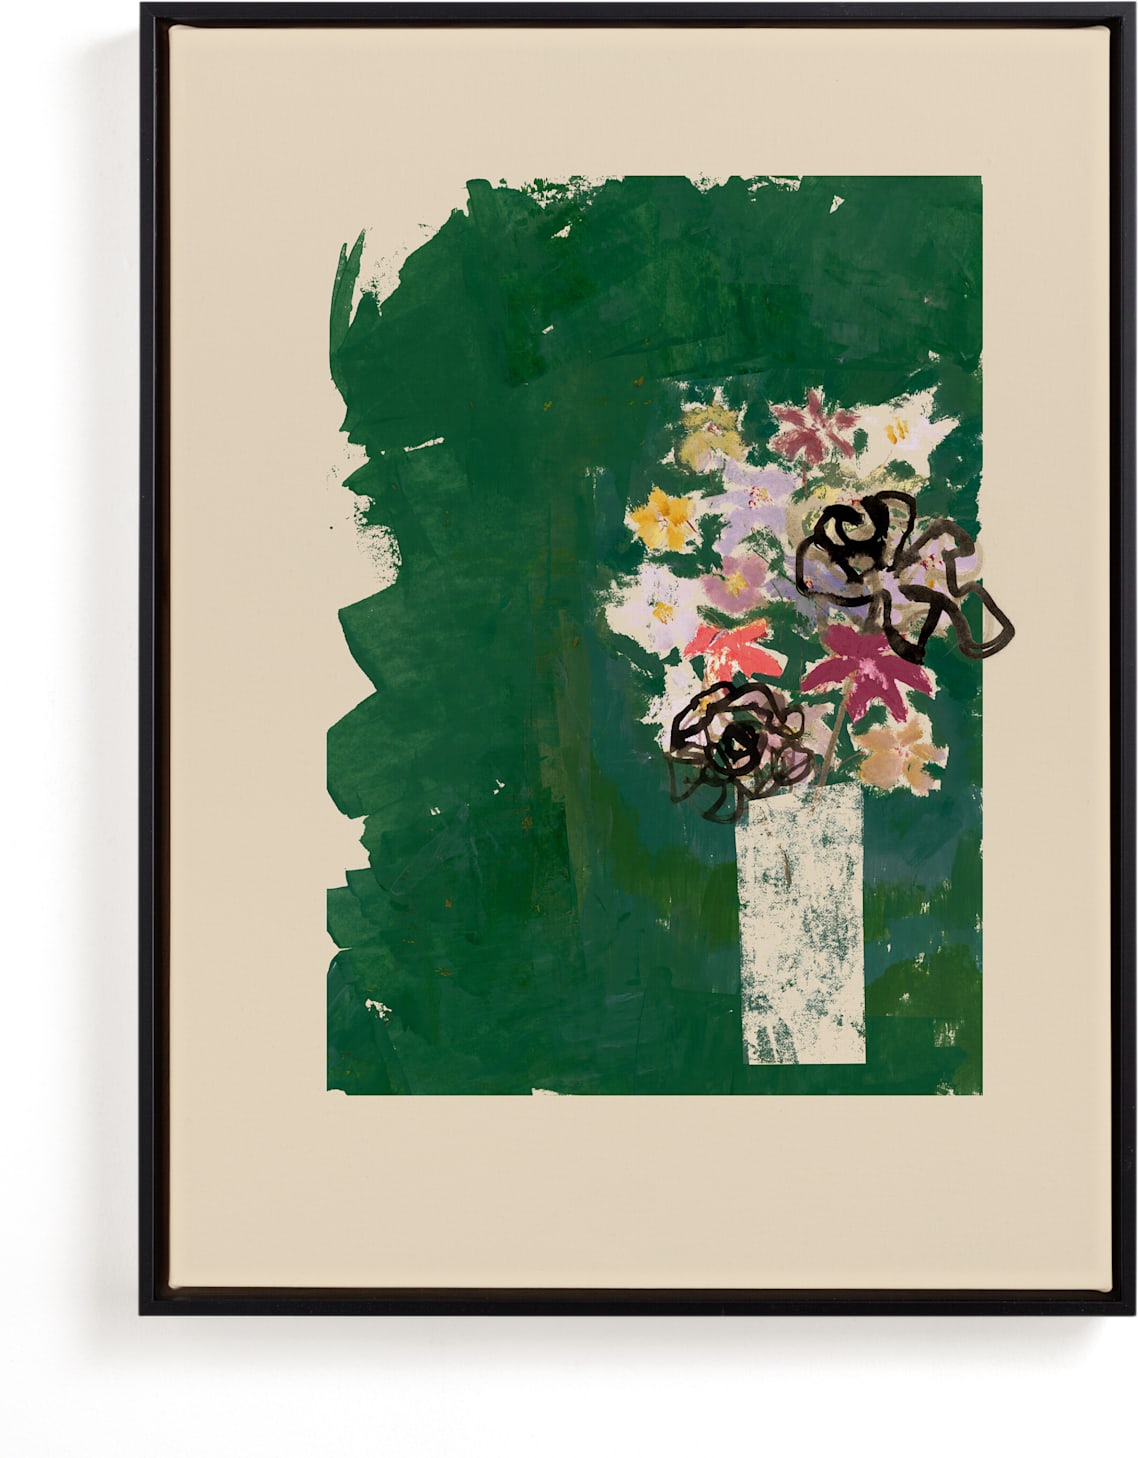 This is a black and white, yellow, green art by Bethania Lima called Bouquet against painted green background.